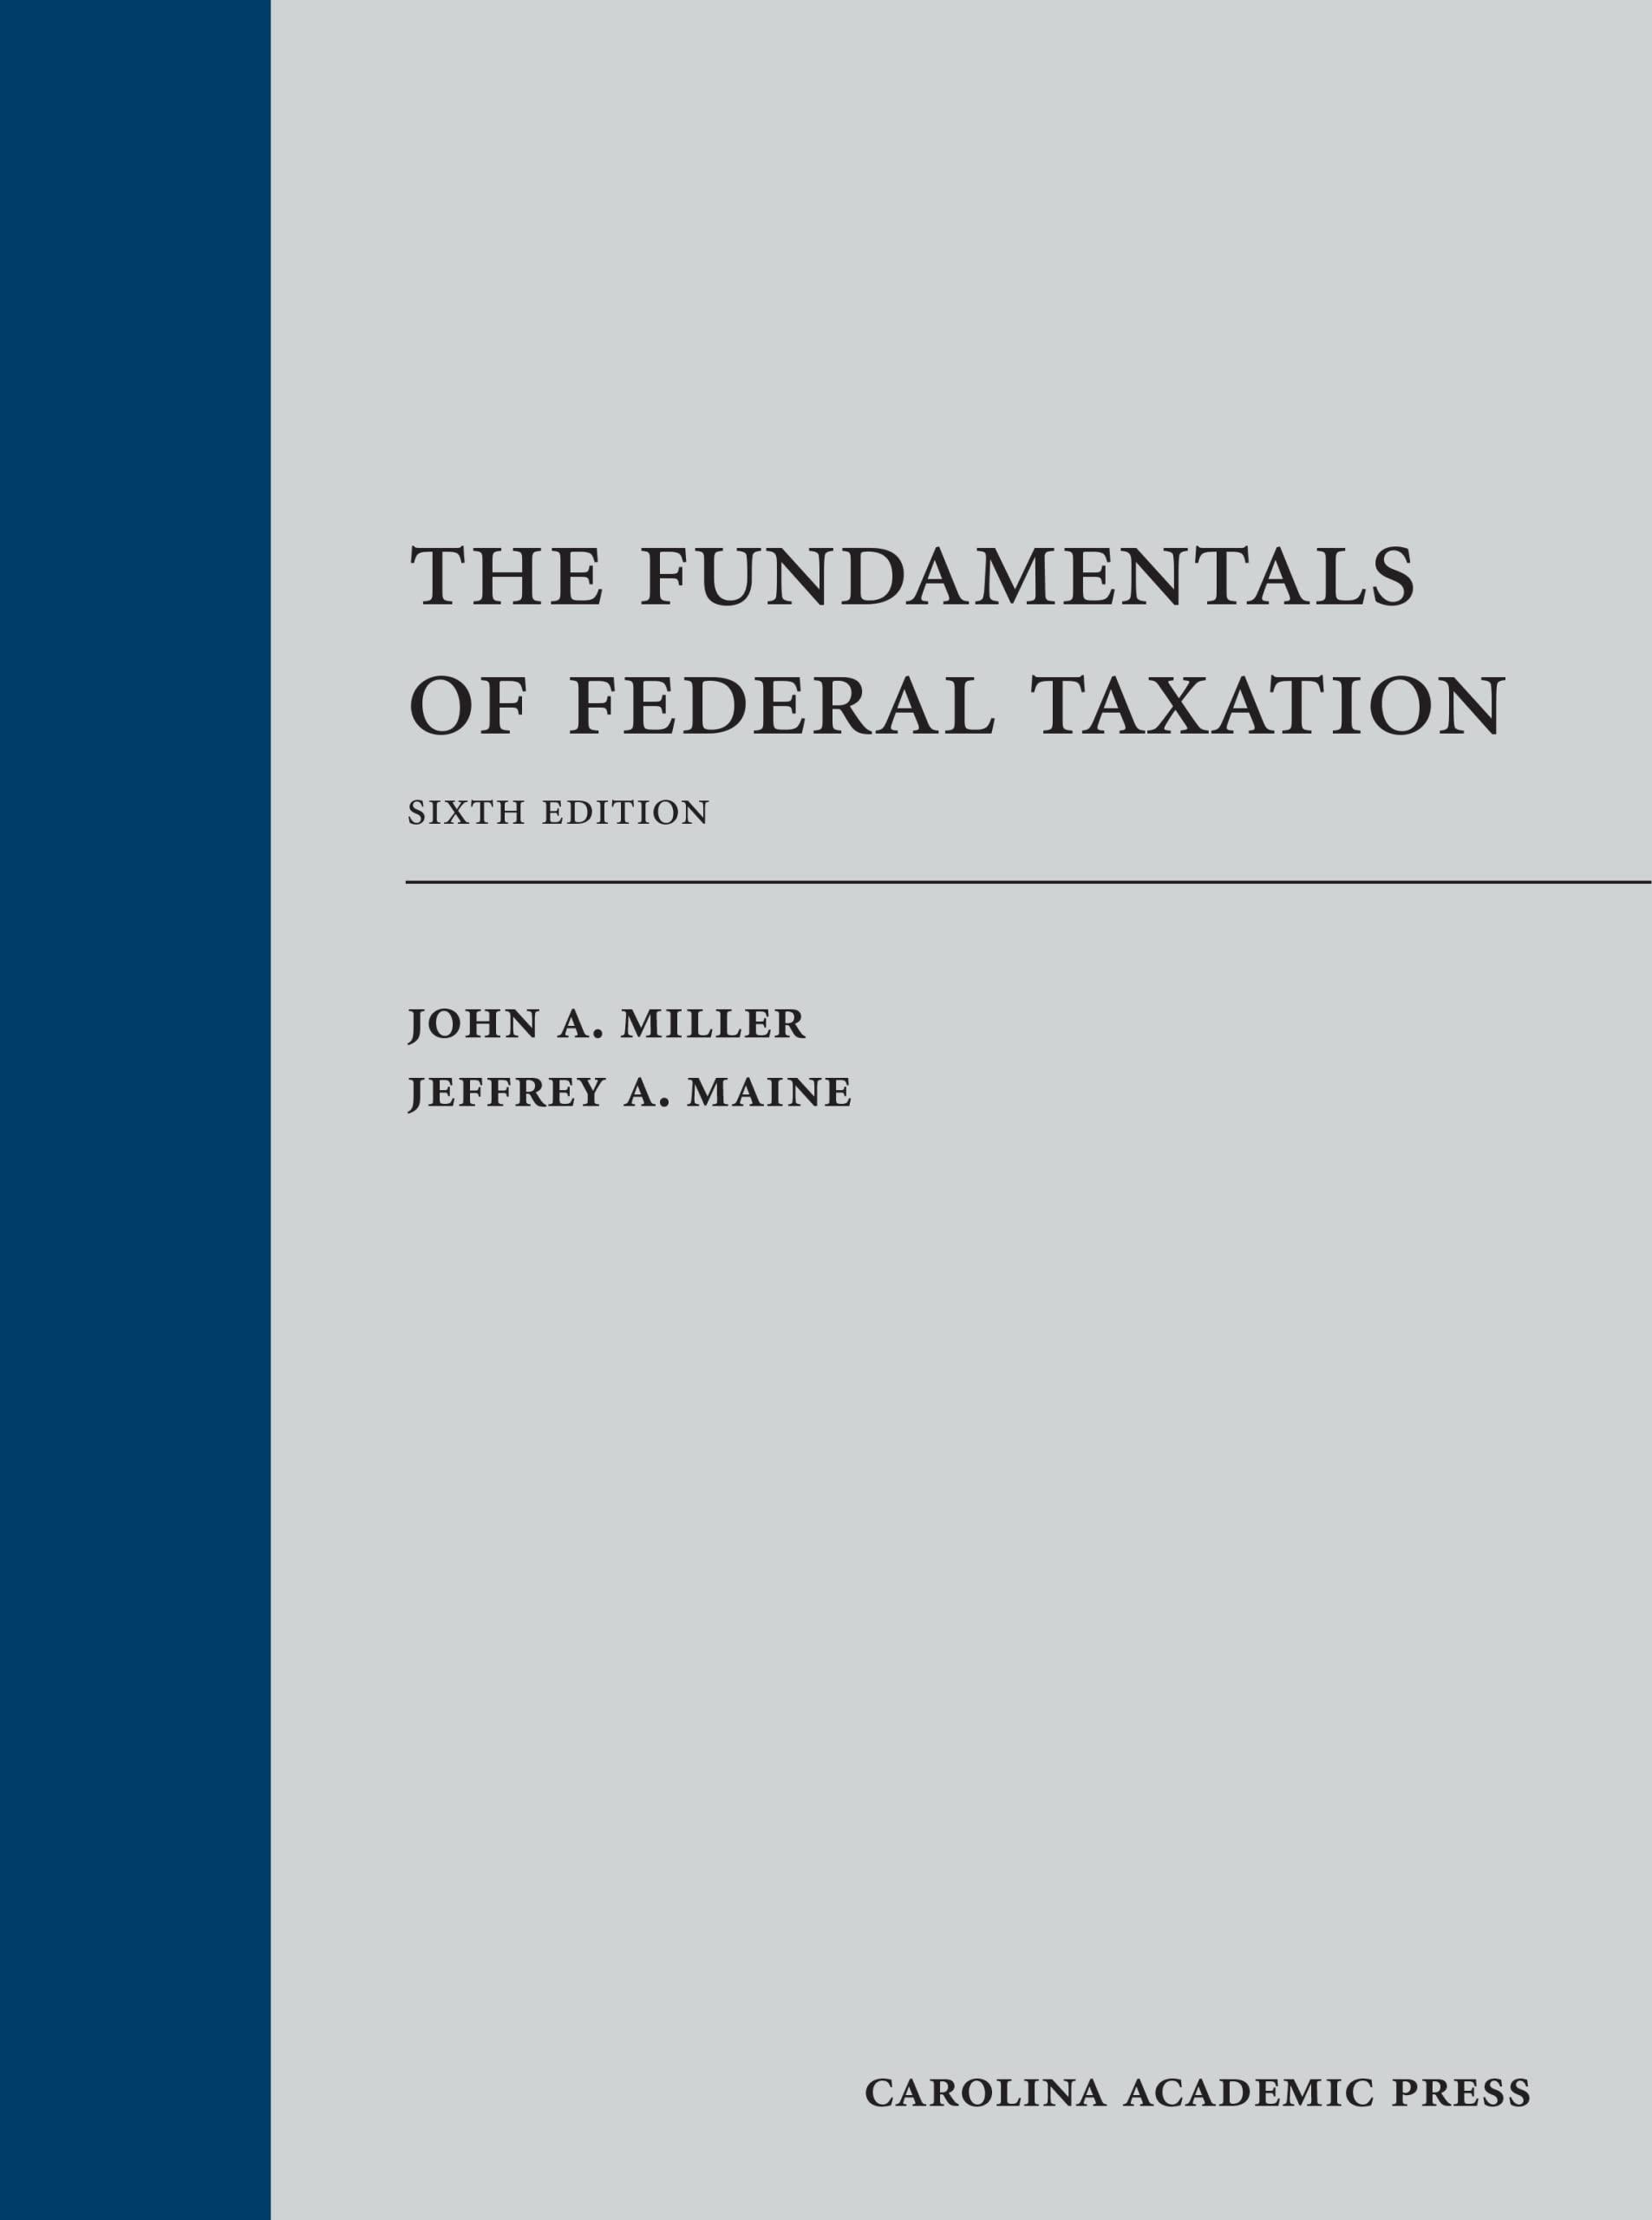 the fundamentals of federal taxation 6th edition john miller, jeffrey maine 1531023657, 9781531023652